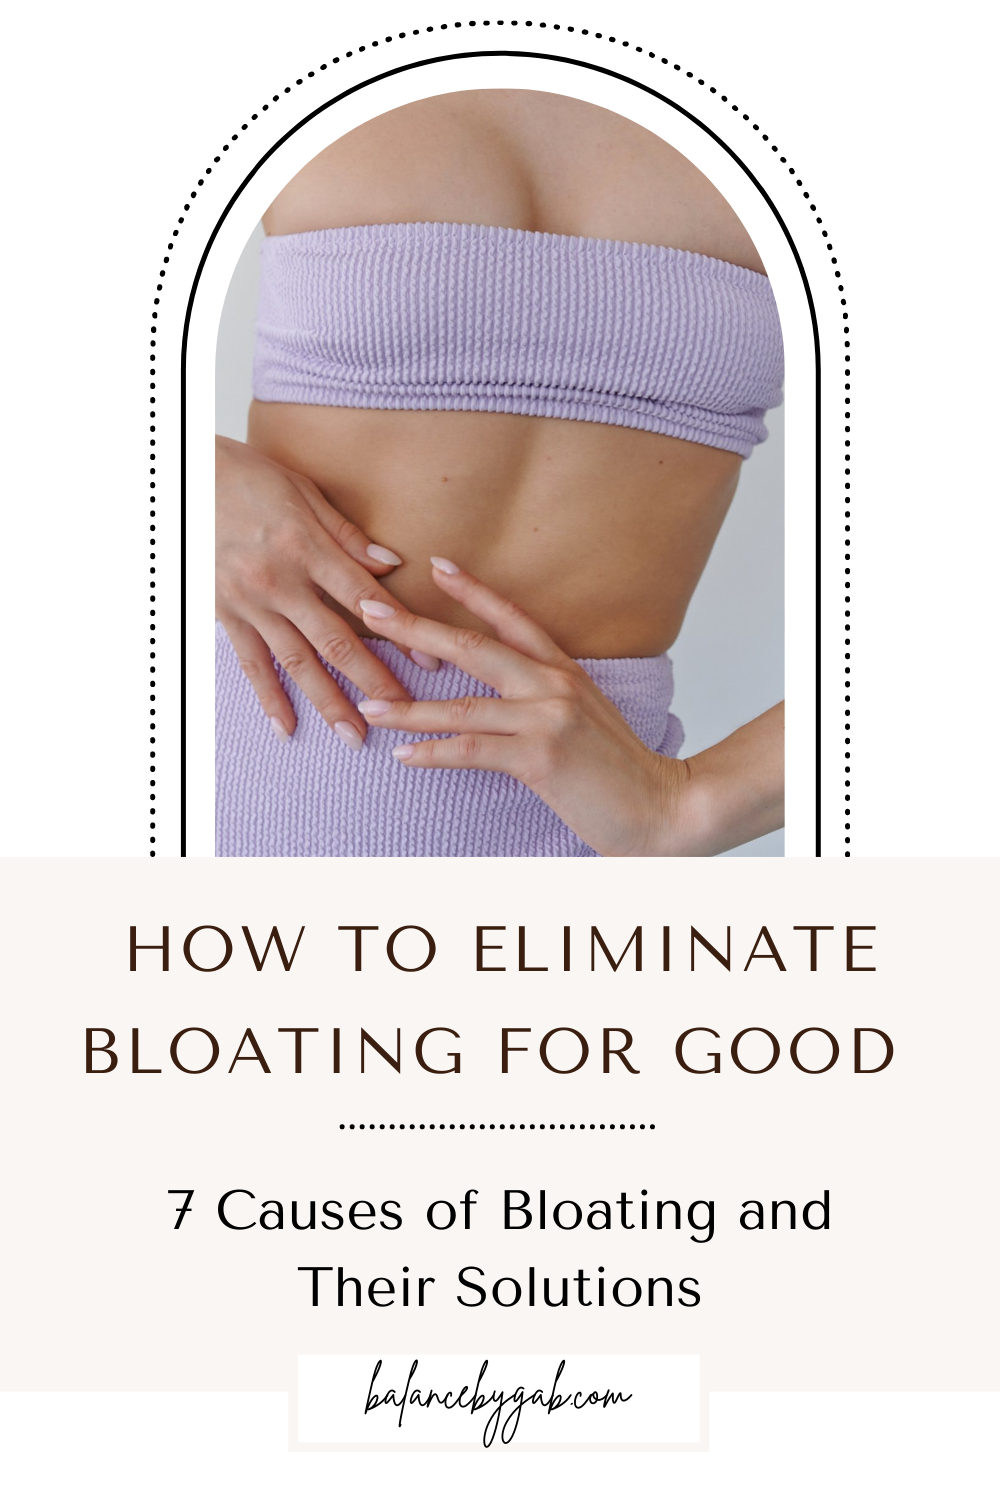 How To Eliminate Bloating for Good: 7 Causes of Bloating and Their